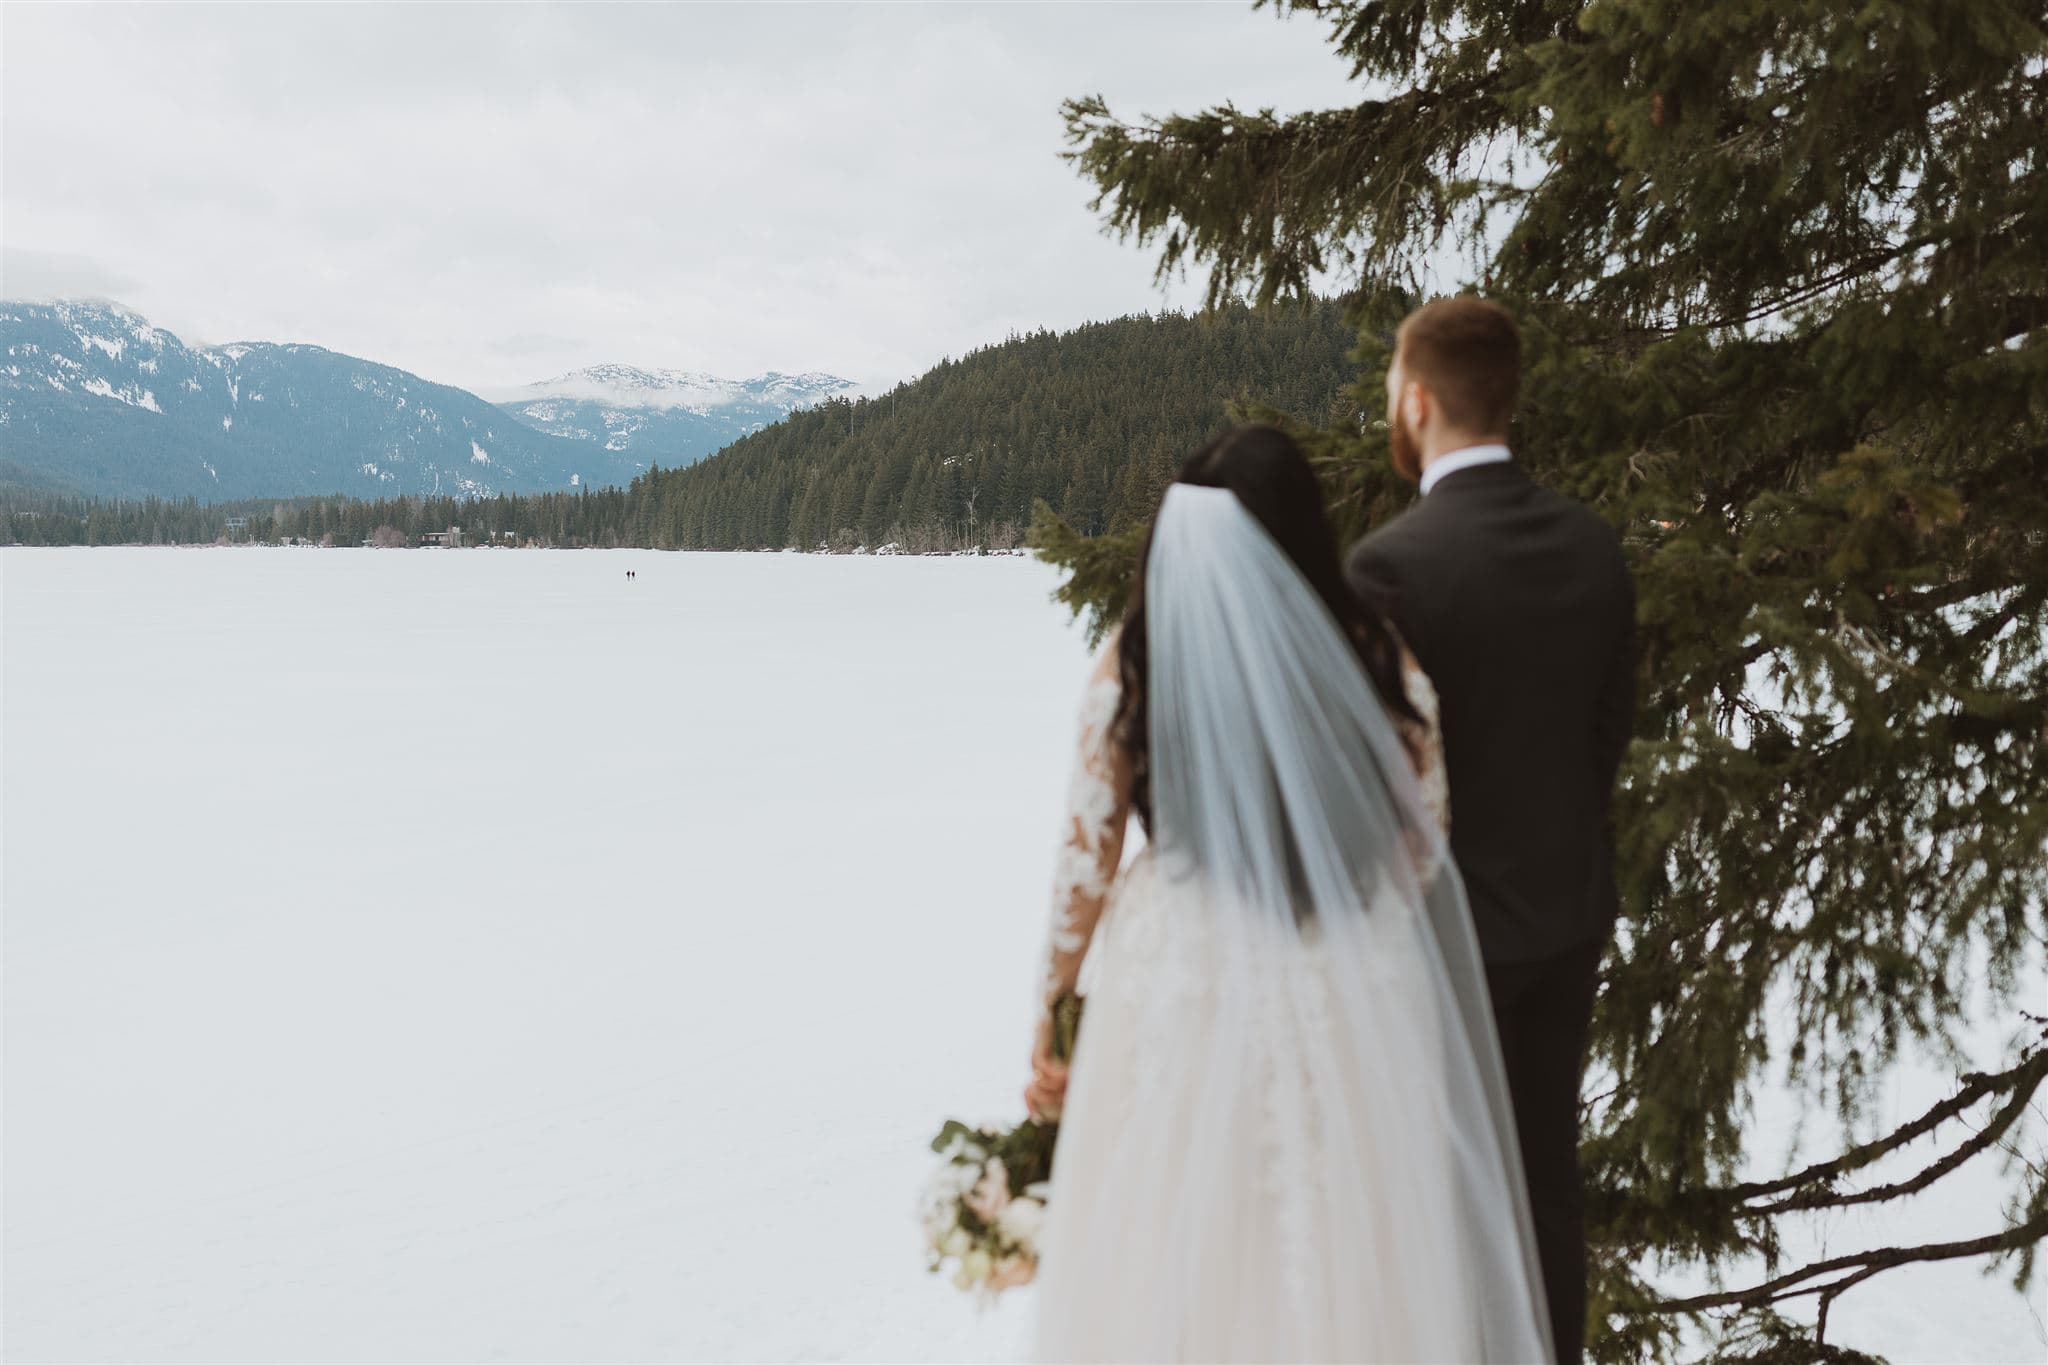 Romance and Adventure: 30 Incredible Elopement Ideas You'll Love